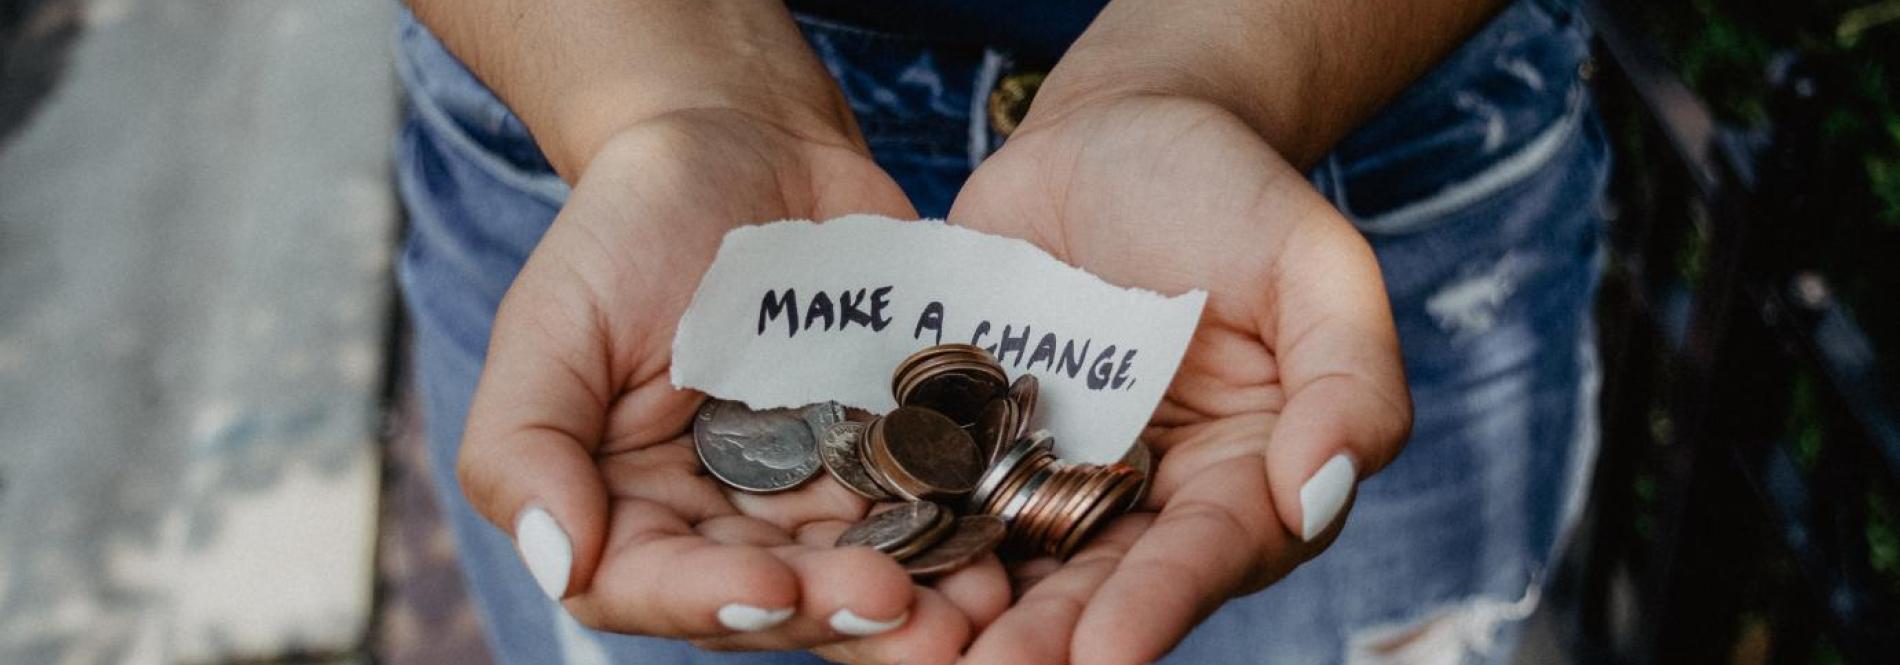 Hands holding note that says make a change with some change in quarters, dimes, and nickels